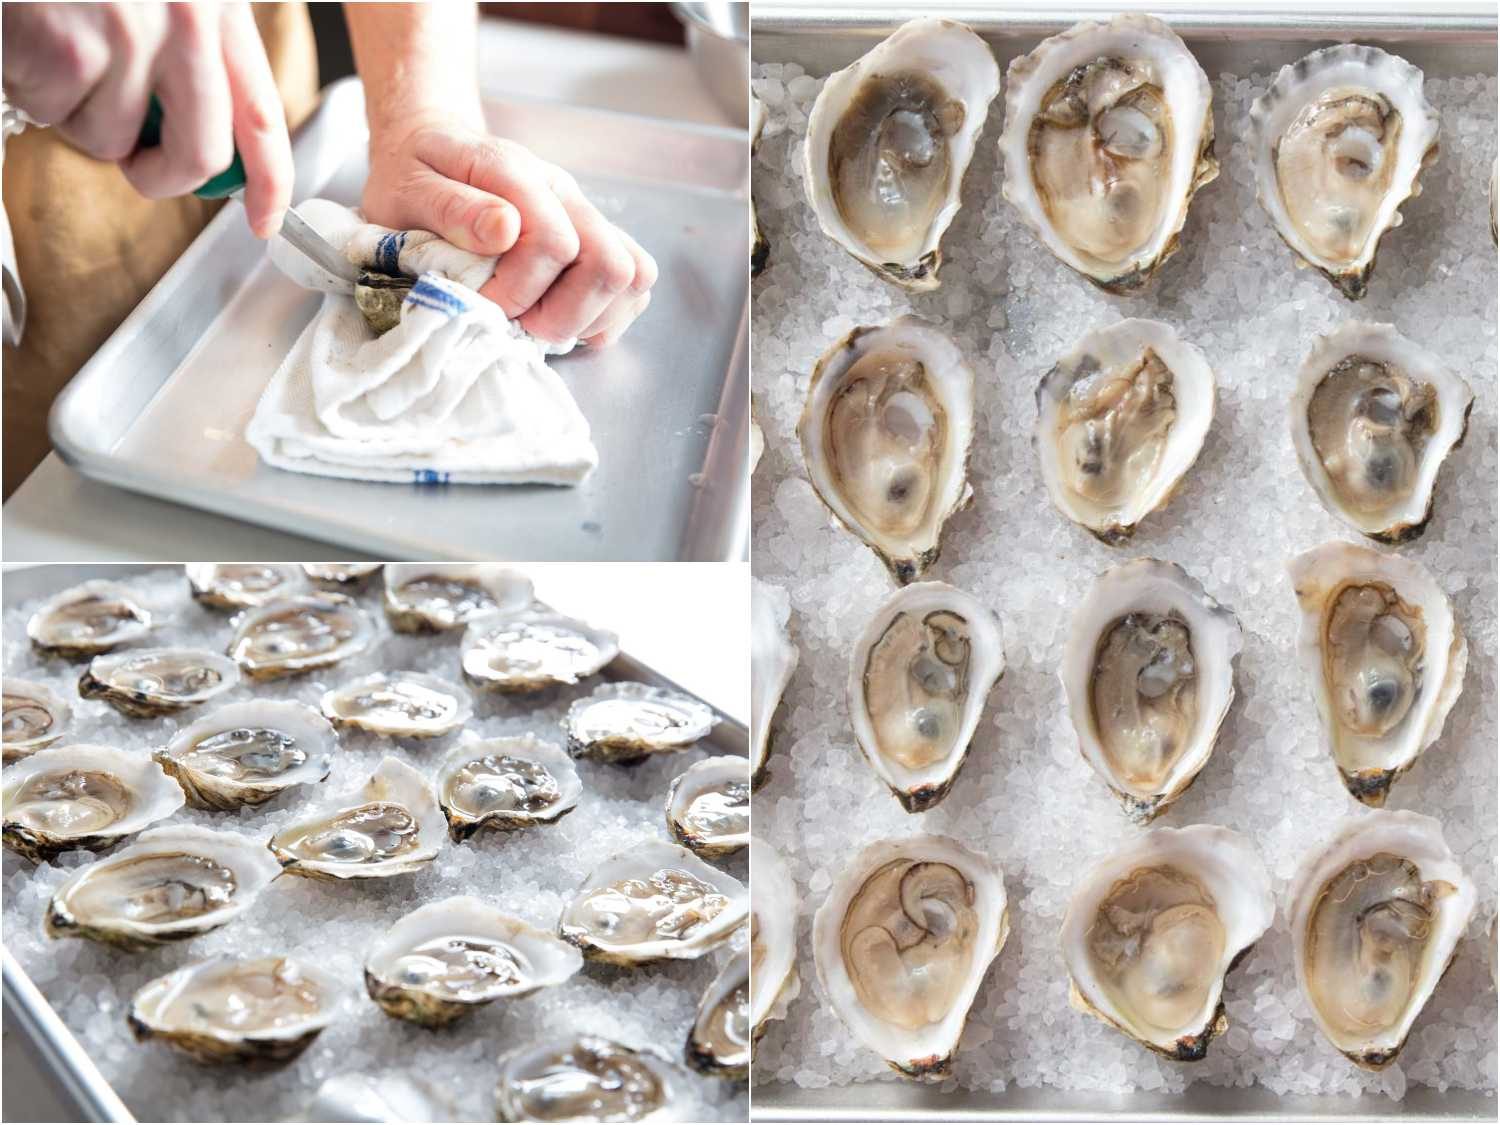 Shucking oysters and placing them on rock salt for oysters Rockefeller.